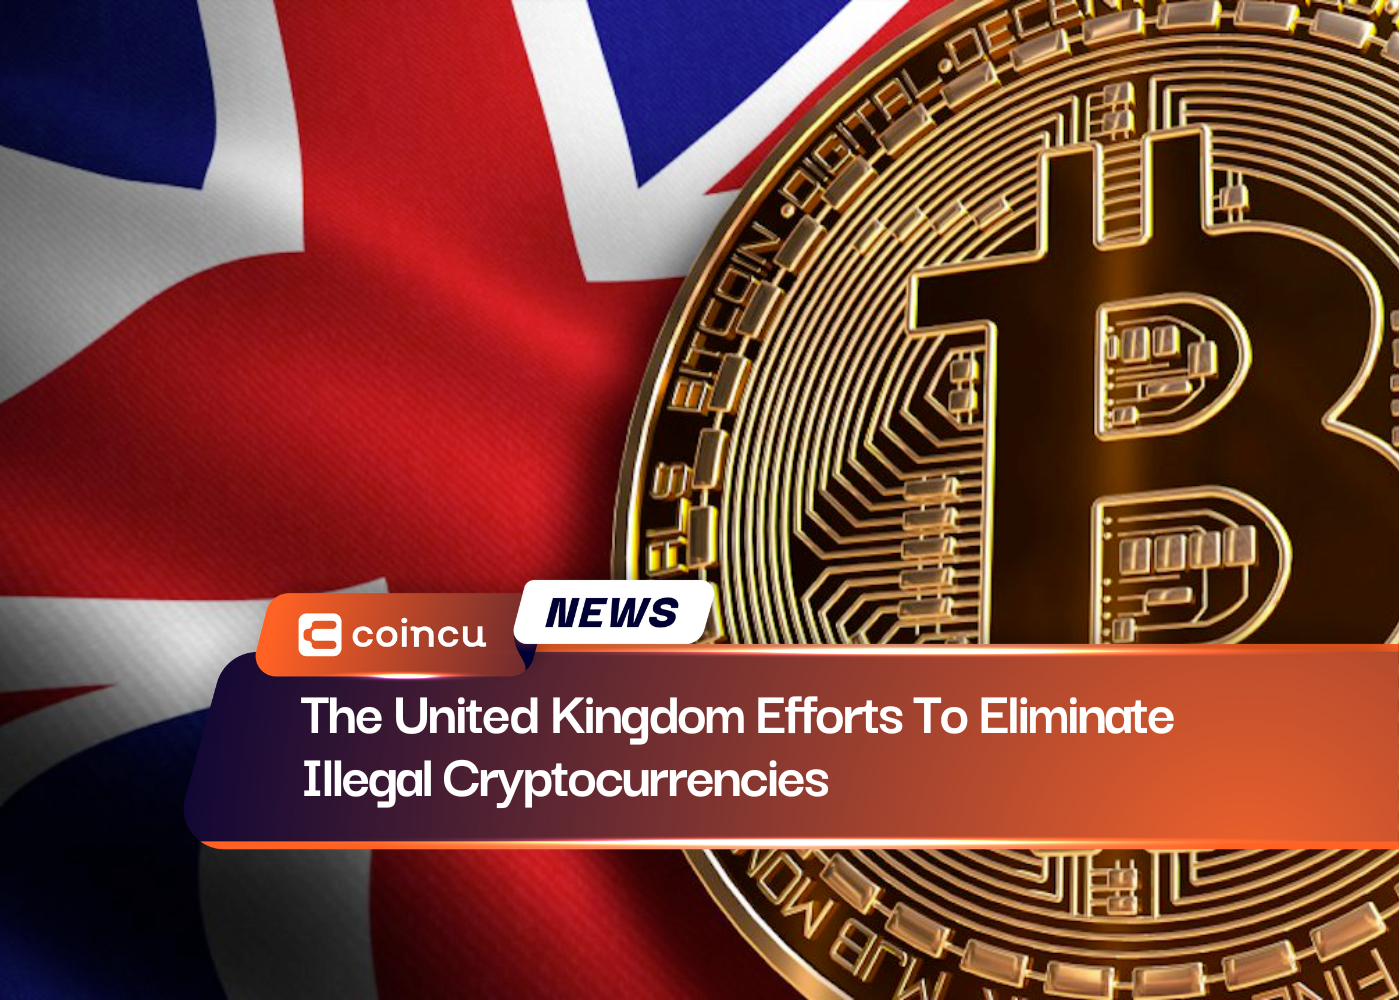 The United Kingdom Efforts To Eliminate Illegal Cryptocurrencies